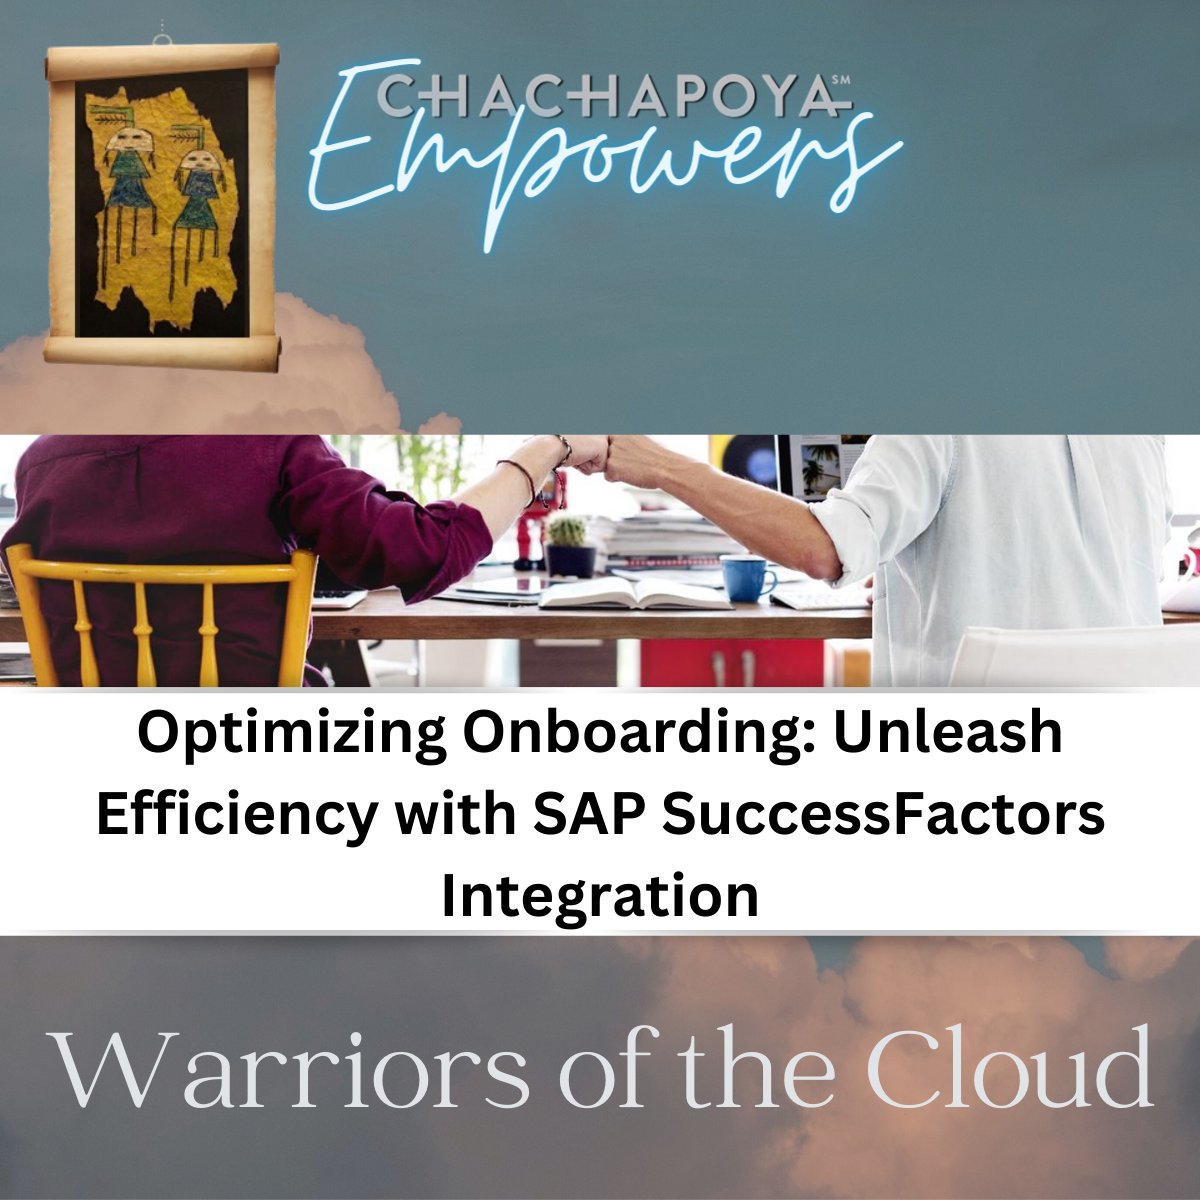 Transform onboarding with SAP SuccessFactors: seamless integration, guided experience, efficiency! Elevate HR practices and empower new hires!🚀🌟 

#Onboarding #HRtech #Efficiency #SAPSuccessFactors #Integration #WarriorsoftheCloud